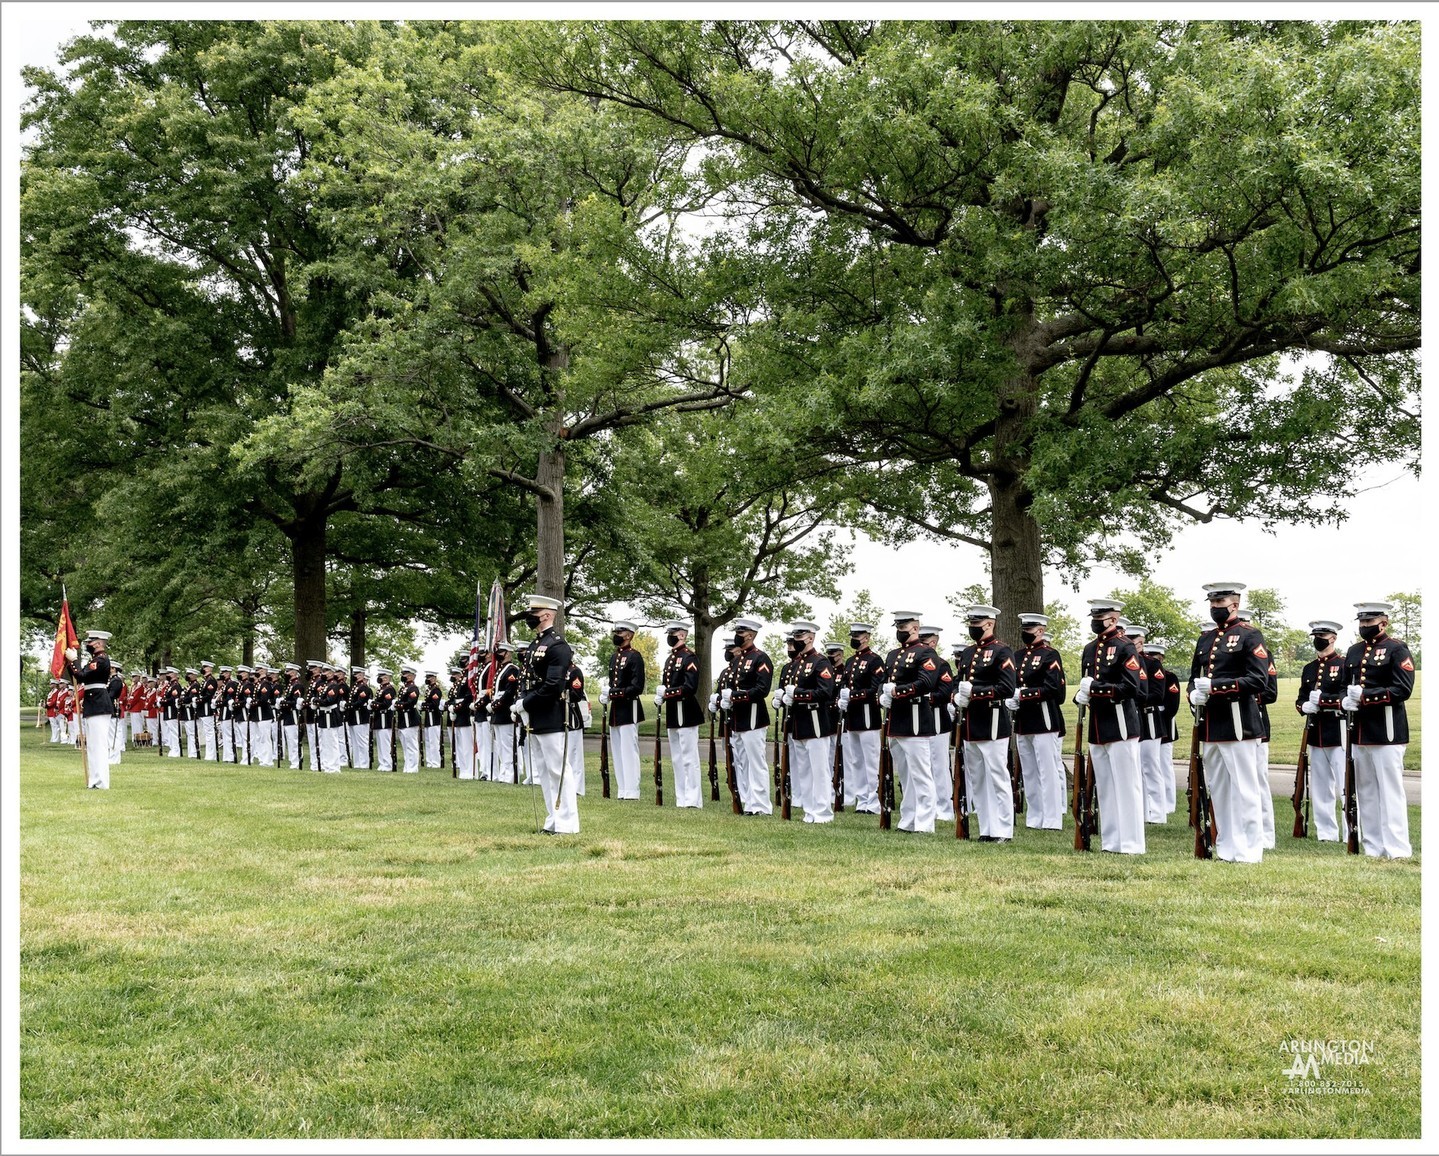 The United States Marine Corps Barracks Washington conducts funeral missions in Arlington National Cemetery.

The mission of Company B of this unit is to perform ceremonial duties and special security tasks in support of the Capitol area, the Military District of Washington, and Marine Barracks Washington.
 
Ceremonial duties include military funeral details at Arlington National Cemetery and throughout the Capitol area, armed forces full honors arrivals at the Pentagon, and armed forces full honors wreath ceremonies at the Tomb of the Unknown Soldier. In addition to ceremonial tasks, Co. B is also responsible for maintaining proficiency in infantry skills to include a contingency security mission to the nation's Capitol in times of civil disturbances.
 
Co. B is also home to the Marine Corps Body Bearers, the bearers of caskets for all Marine Corps funerals within the Capitol area and many high-ranking government officials.